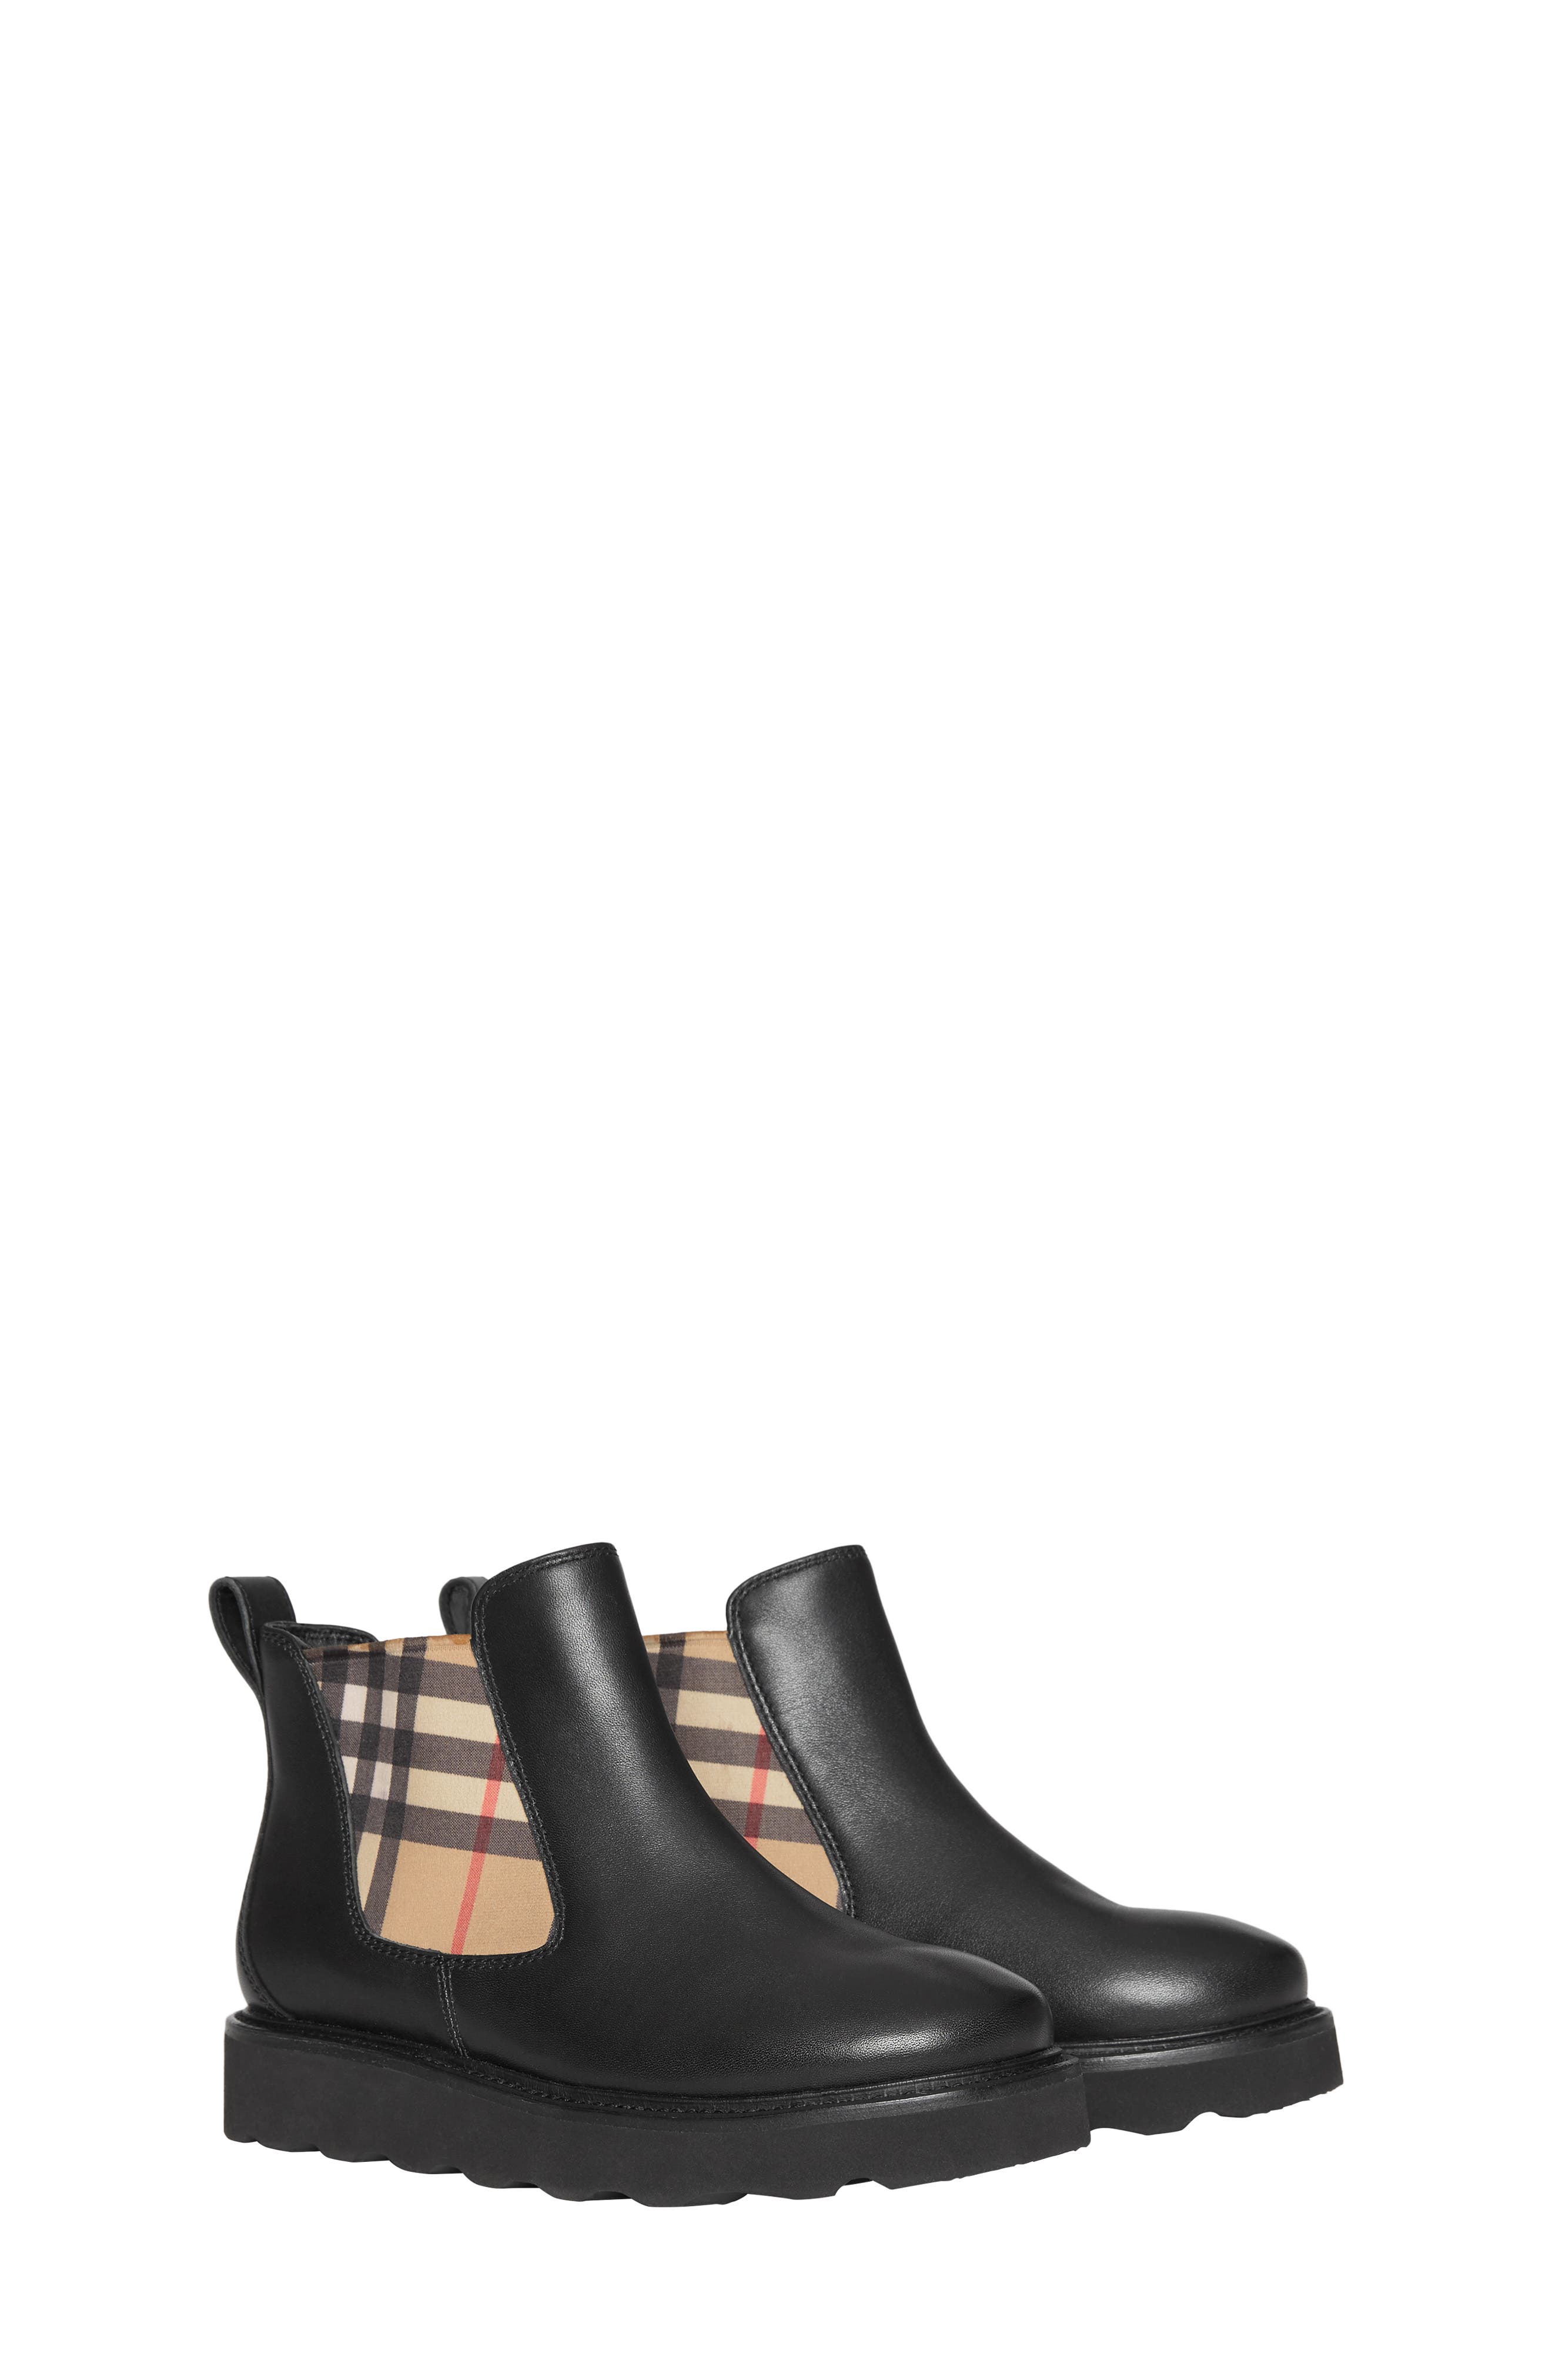 burberry boots kids gold